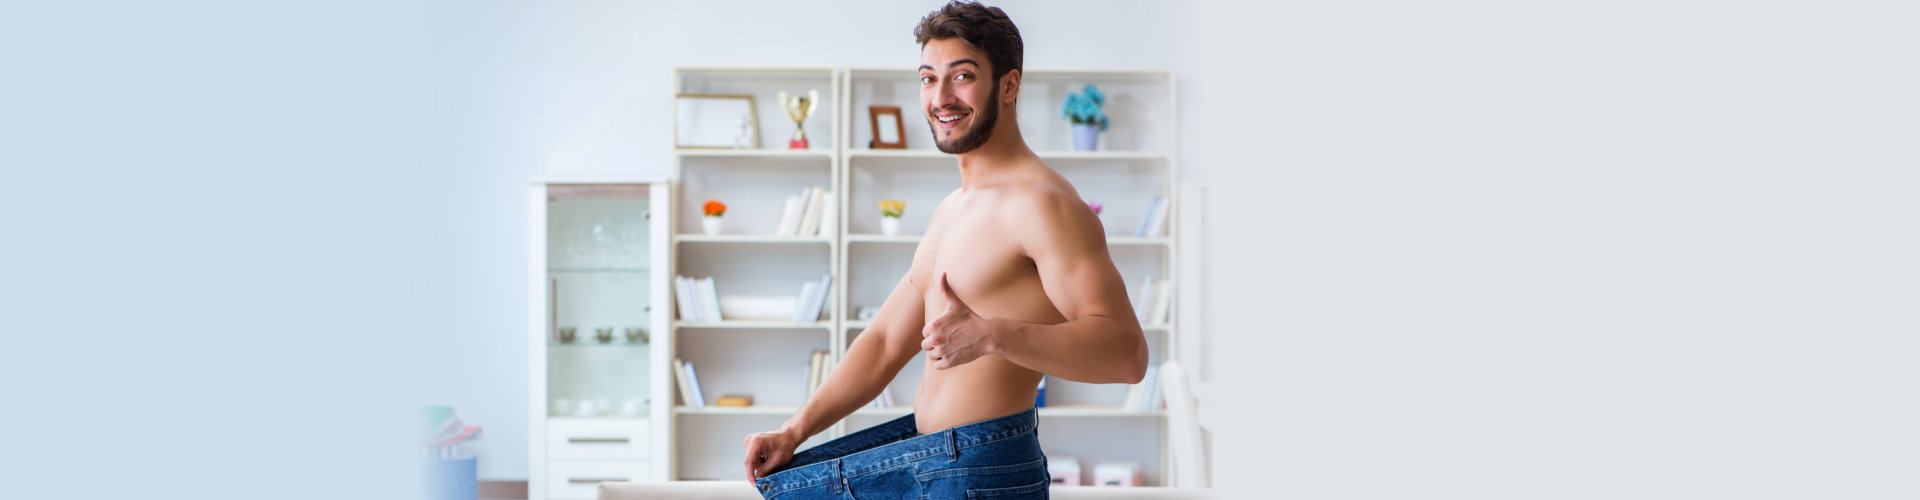 man proud of his weight loss